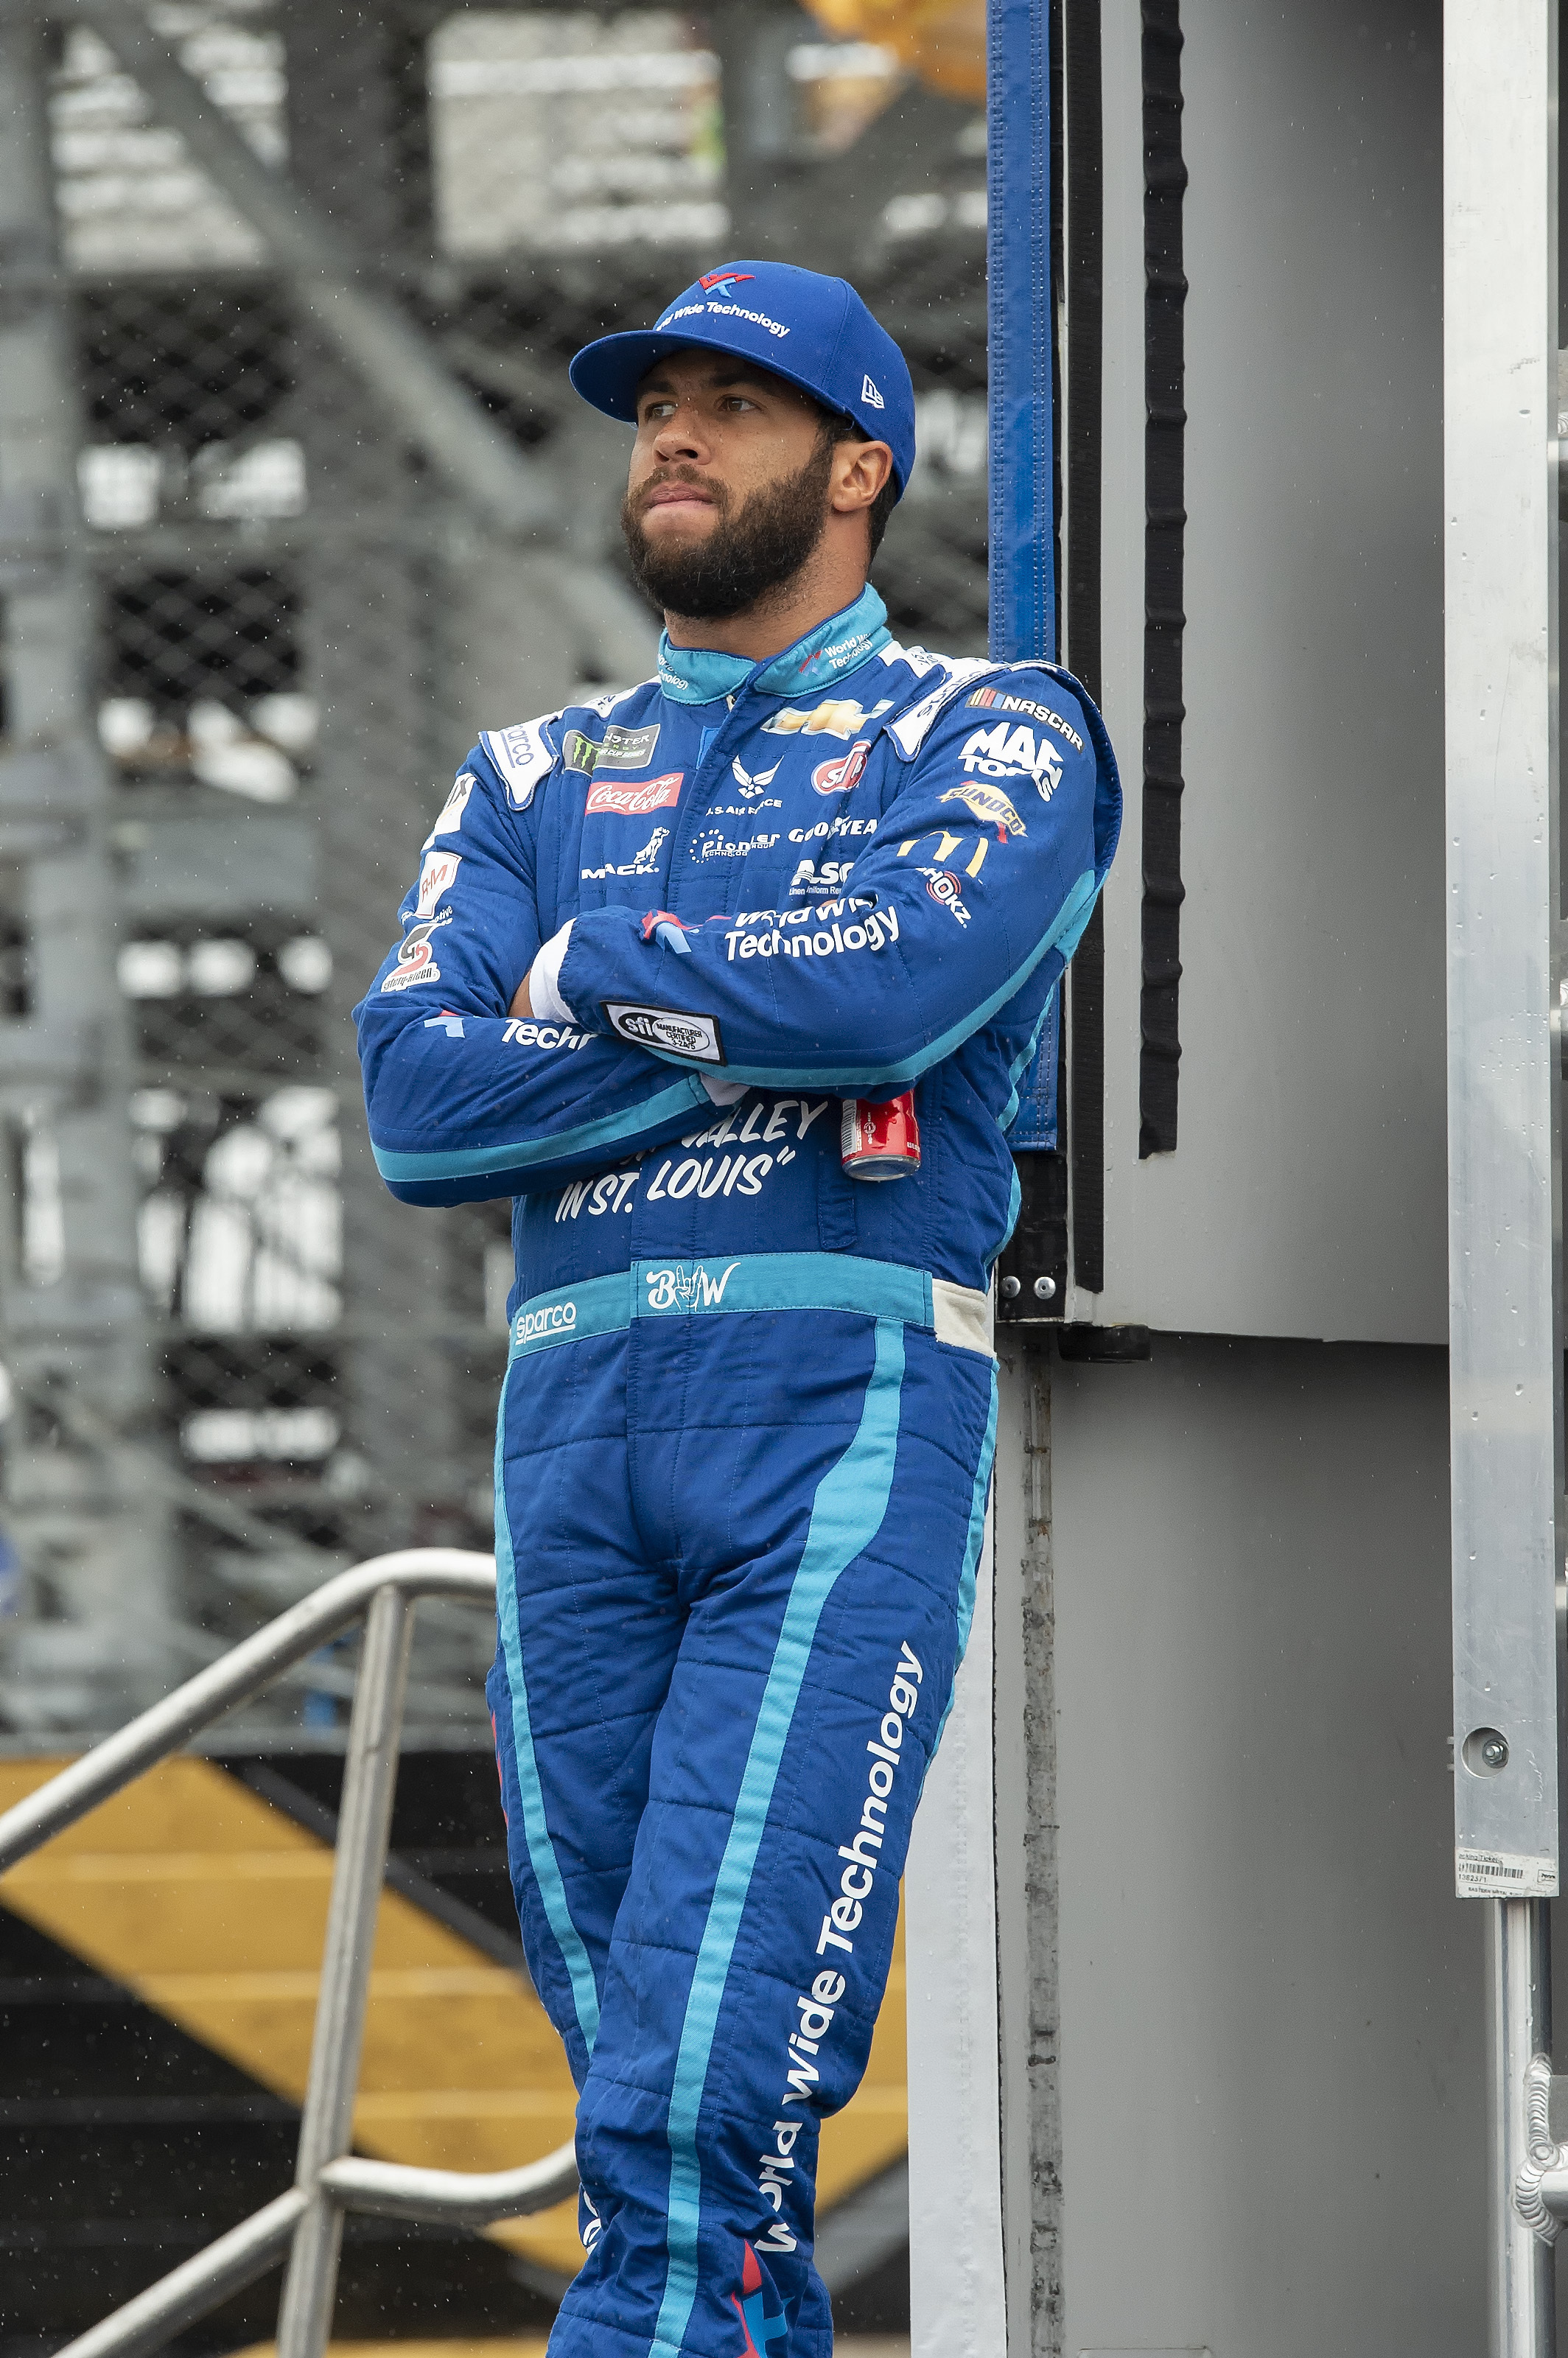 NASCAR’s Bubba Wallace struggling with depression